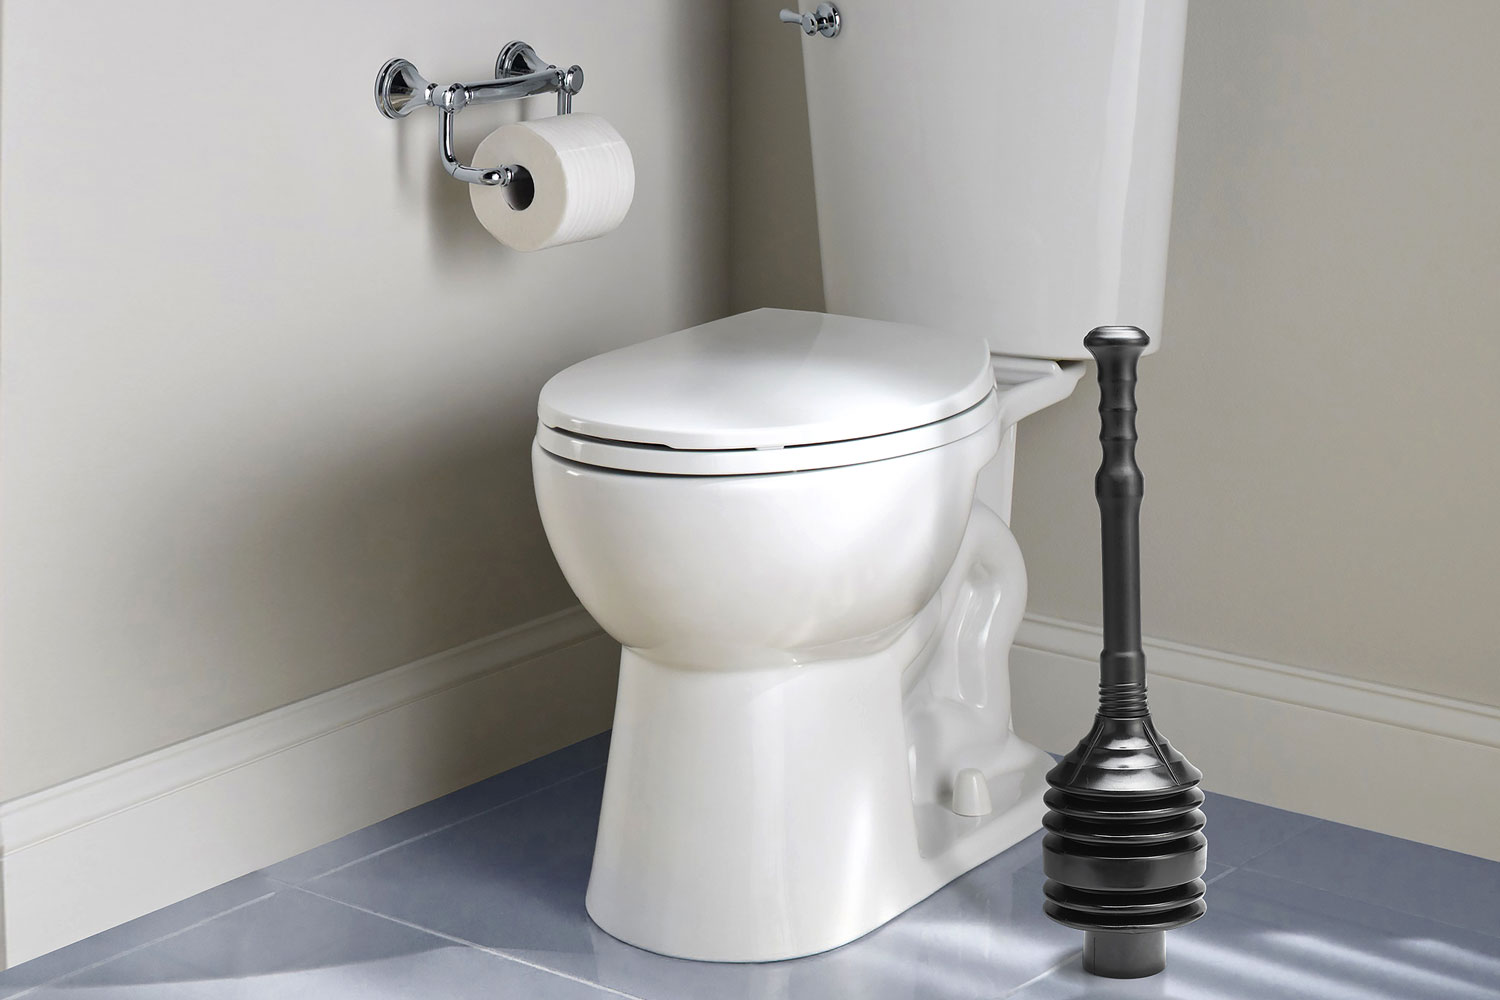 Proper placing of toilet plunger in a bathroom, where and how to store a toilet plunger